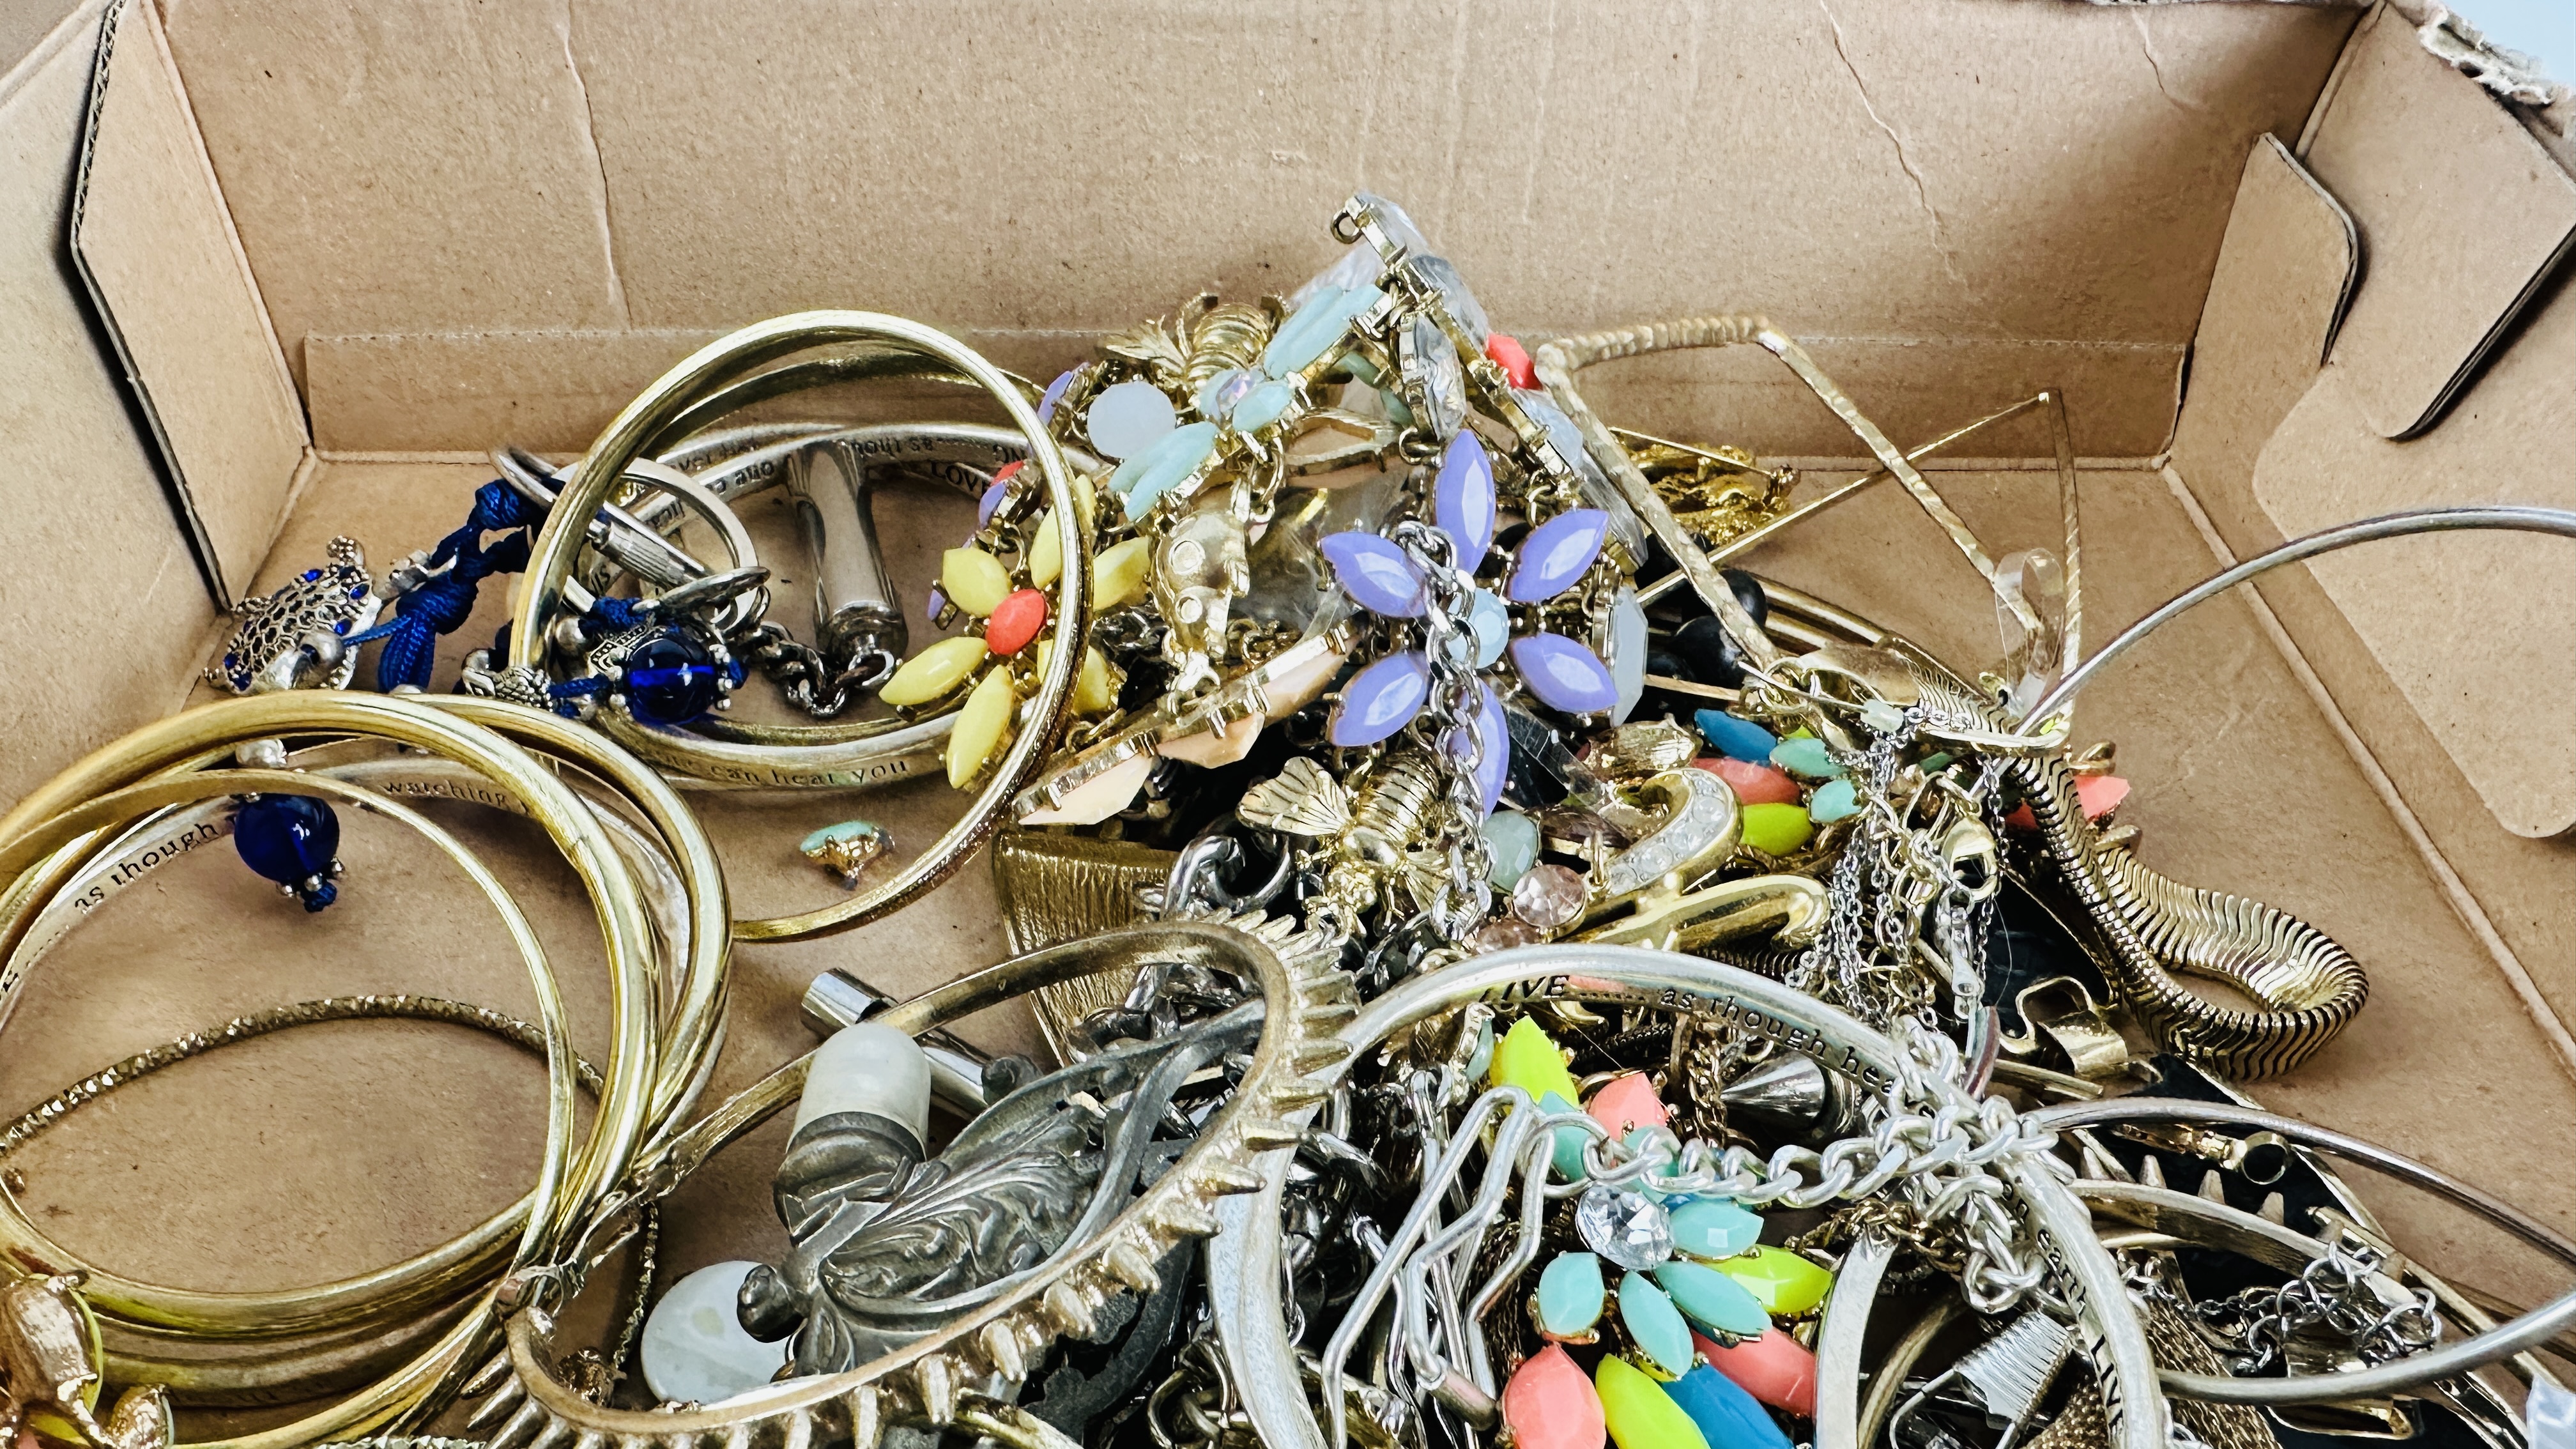 BOX MIXED COSTUME JEWELLERY INCLUDING NECKLACES, BANGLES, BRACELETS, BROOCHES, EARRINGS, ETC. - Image 3 of 6